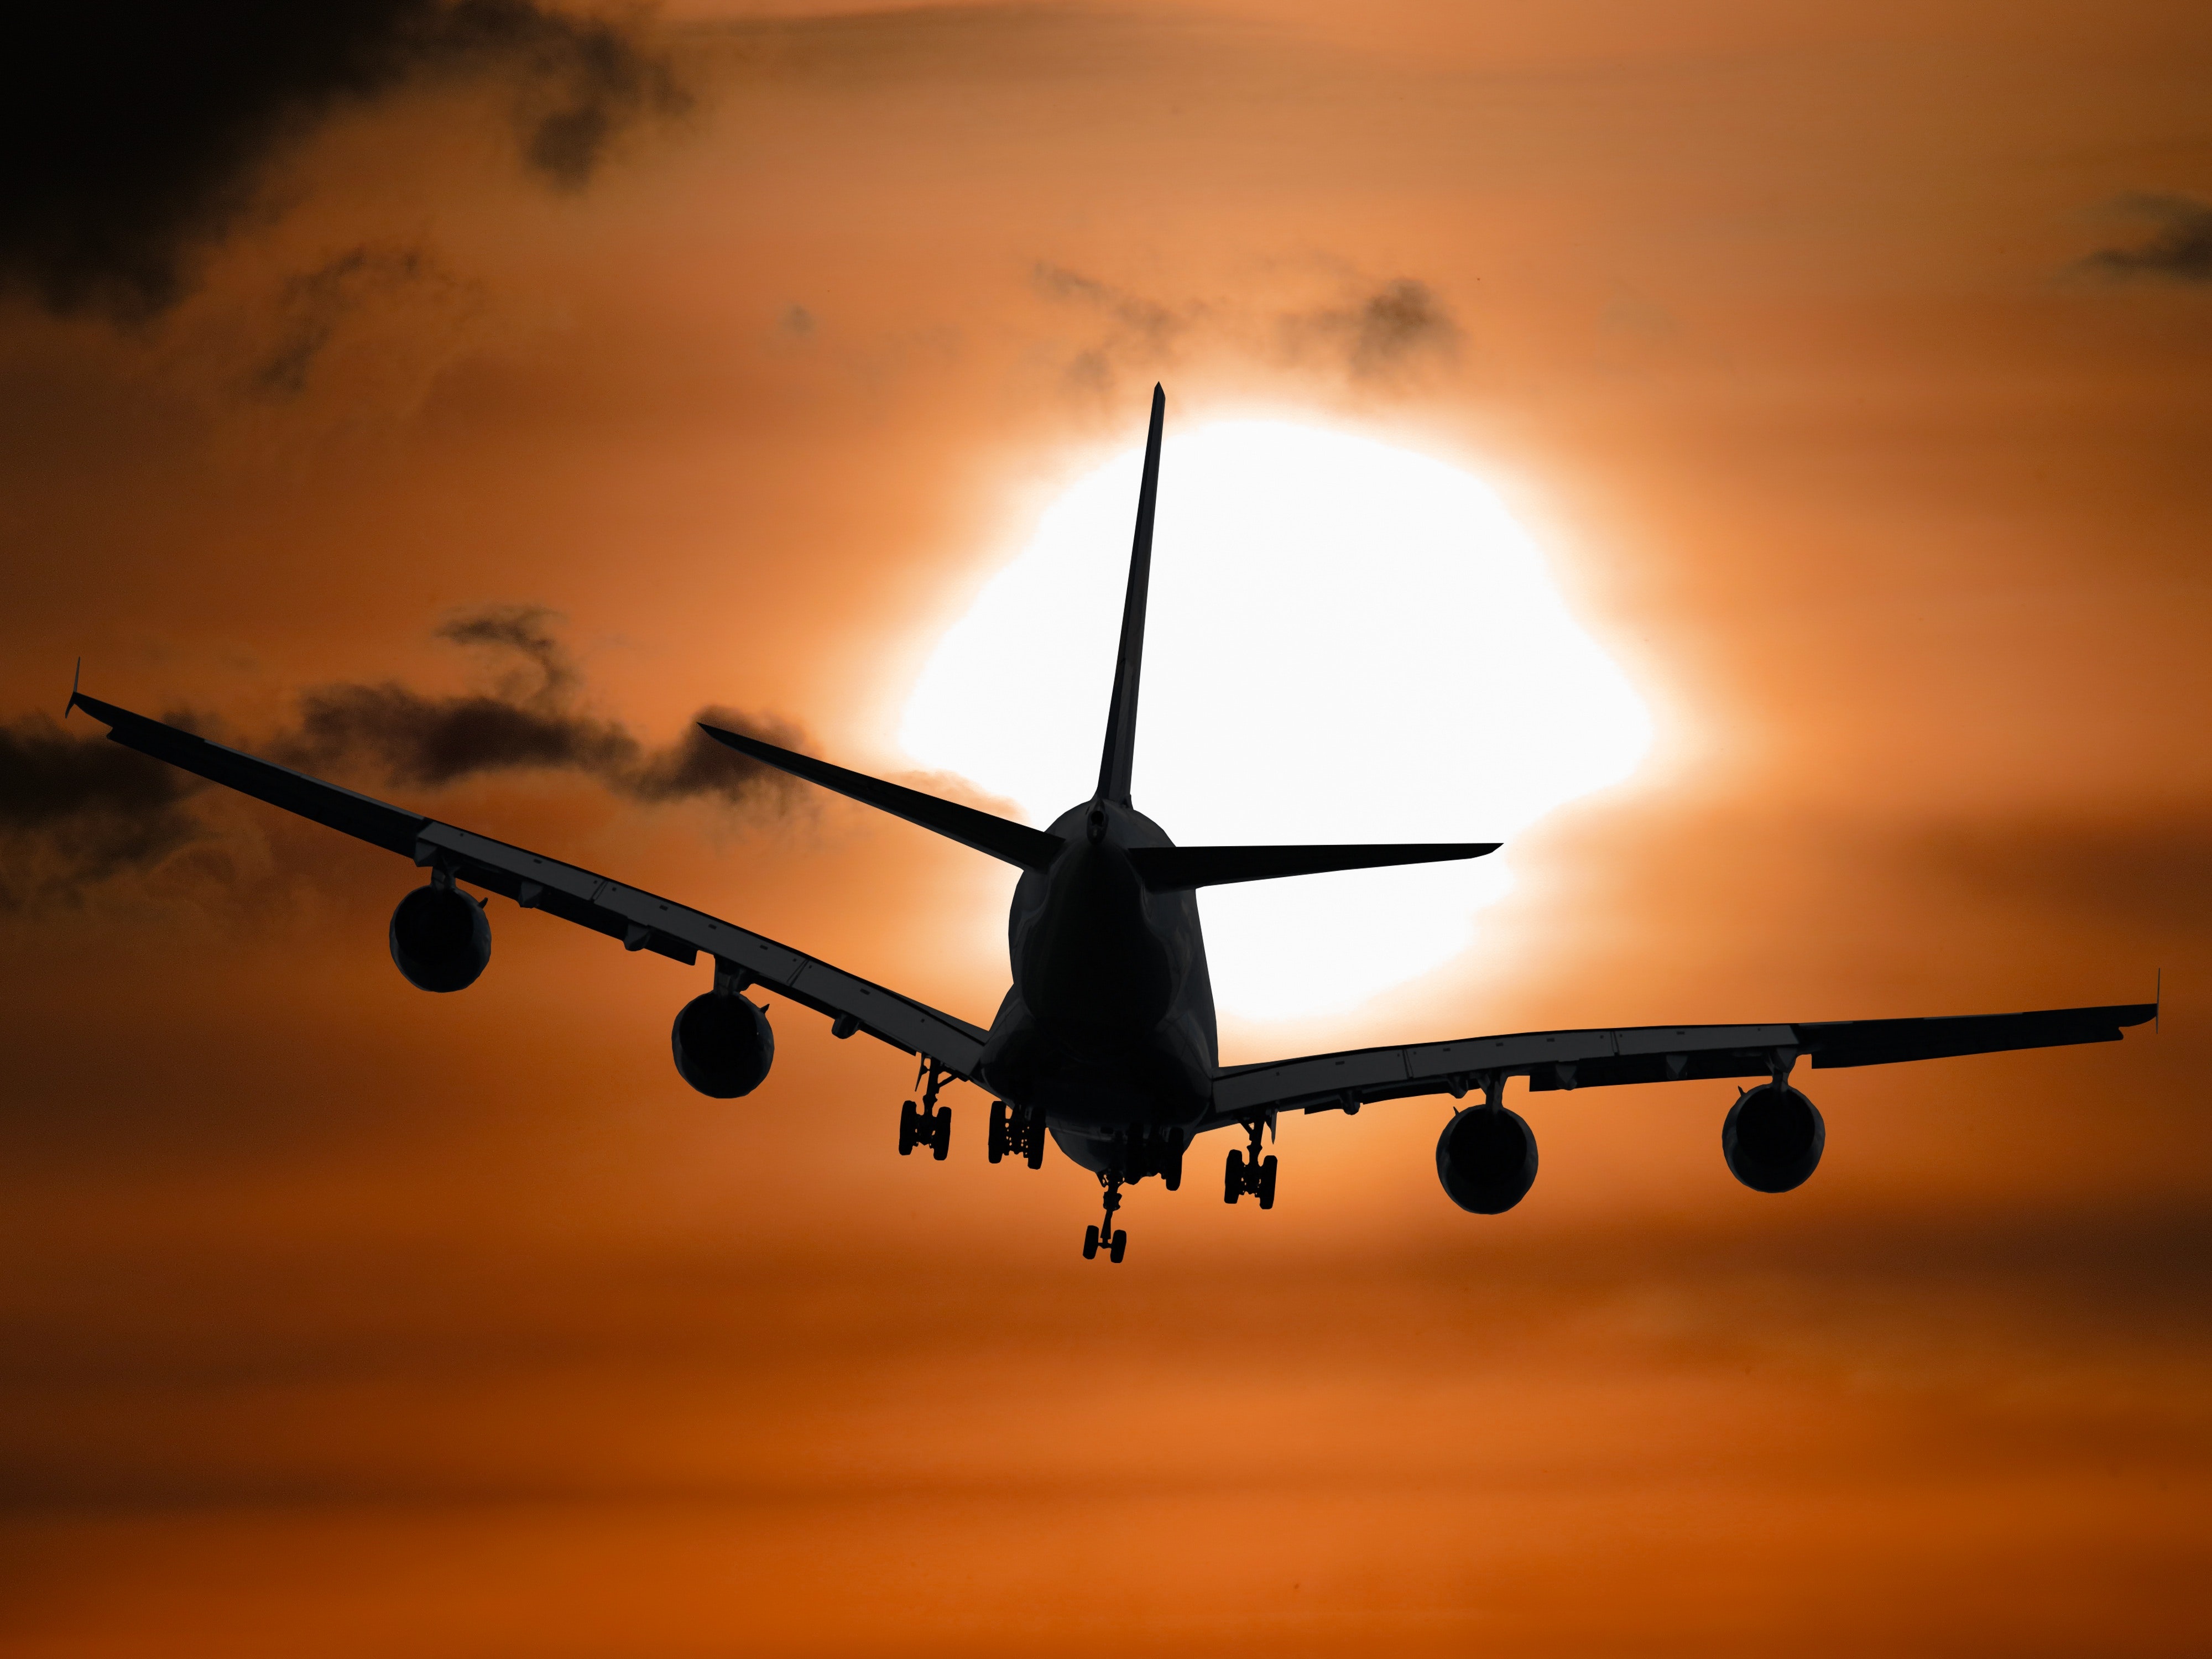 Shadow Image of a Plane Flying during Sunset · Free